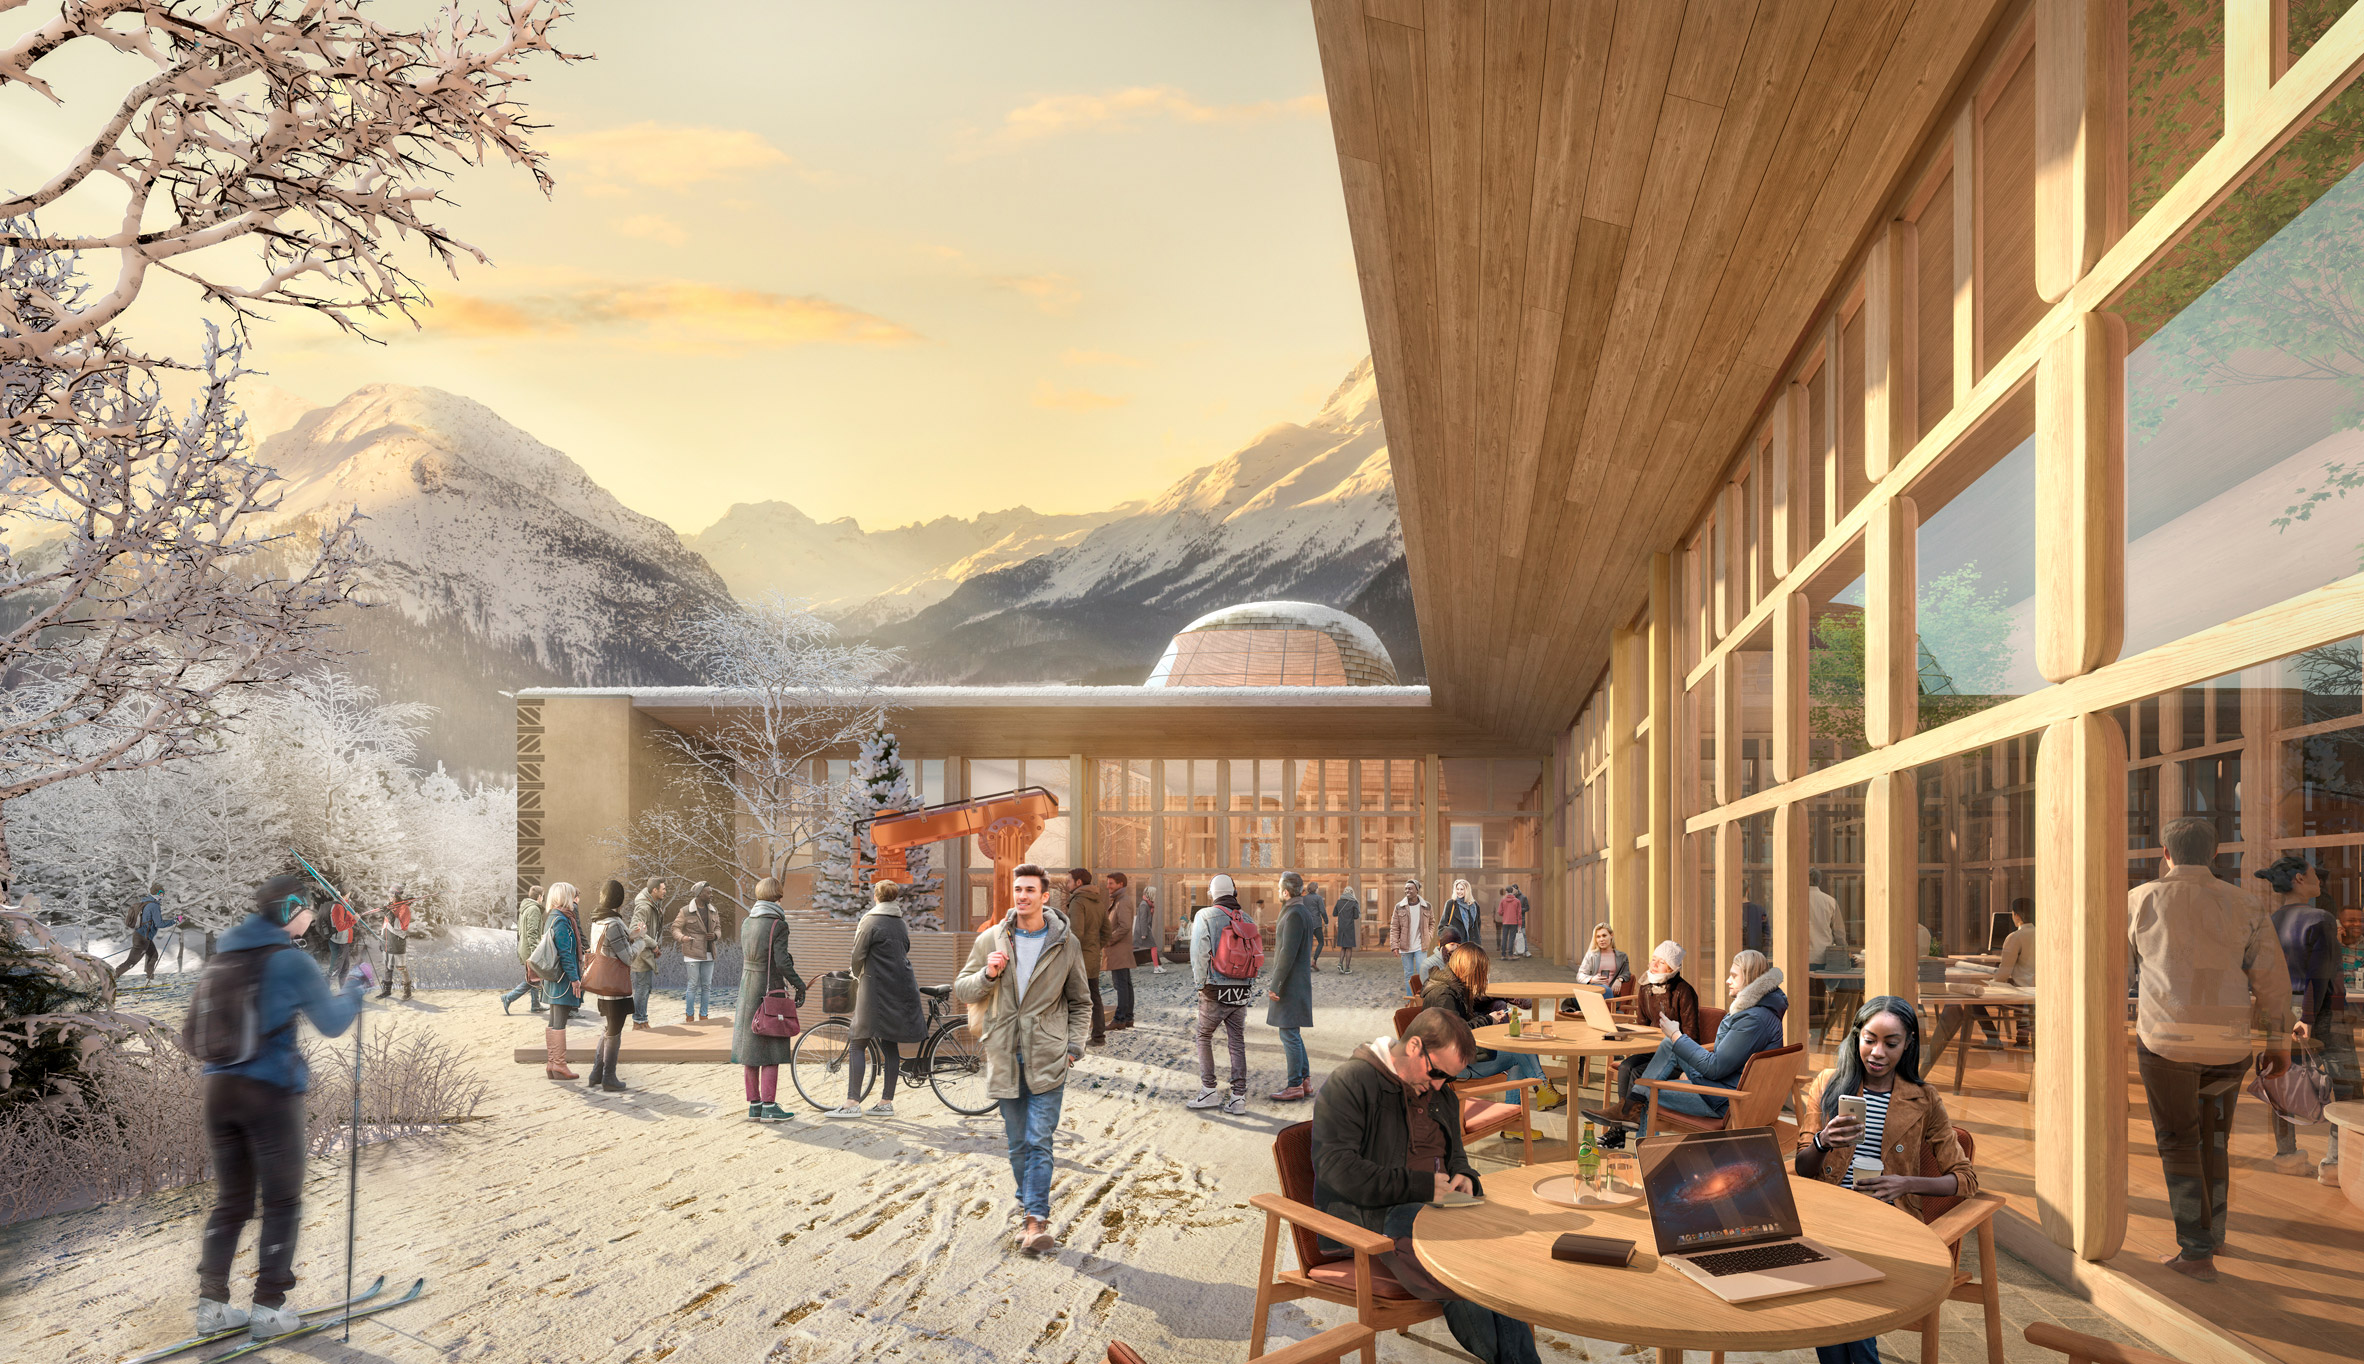 The larch-clad exterior of an innovation hub in the Swiss Alps